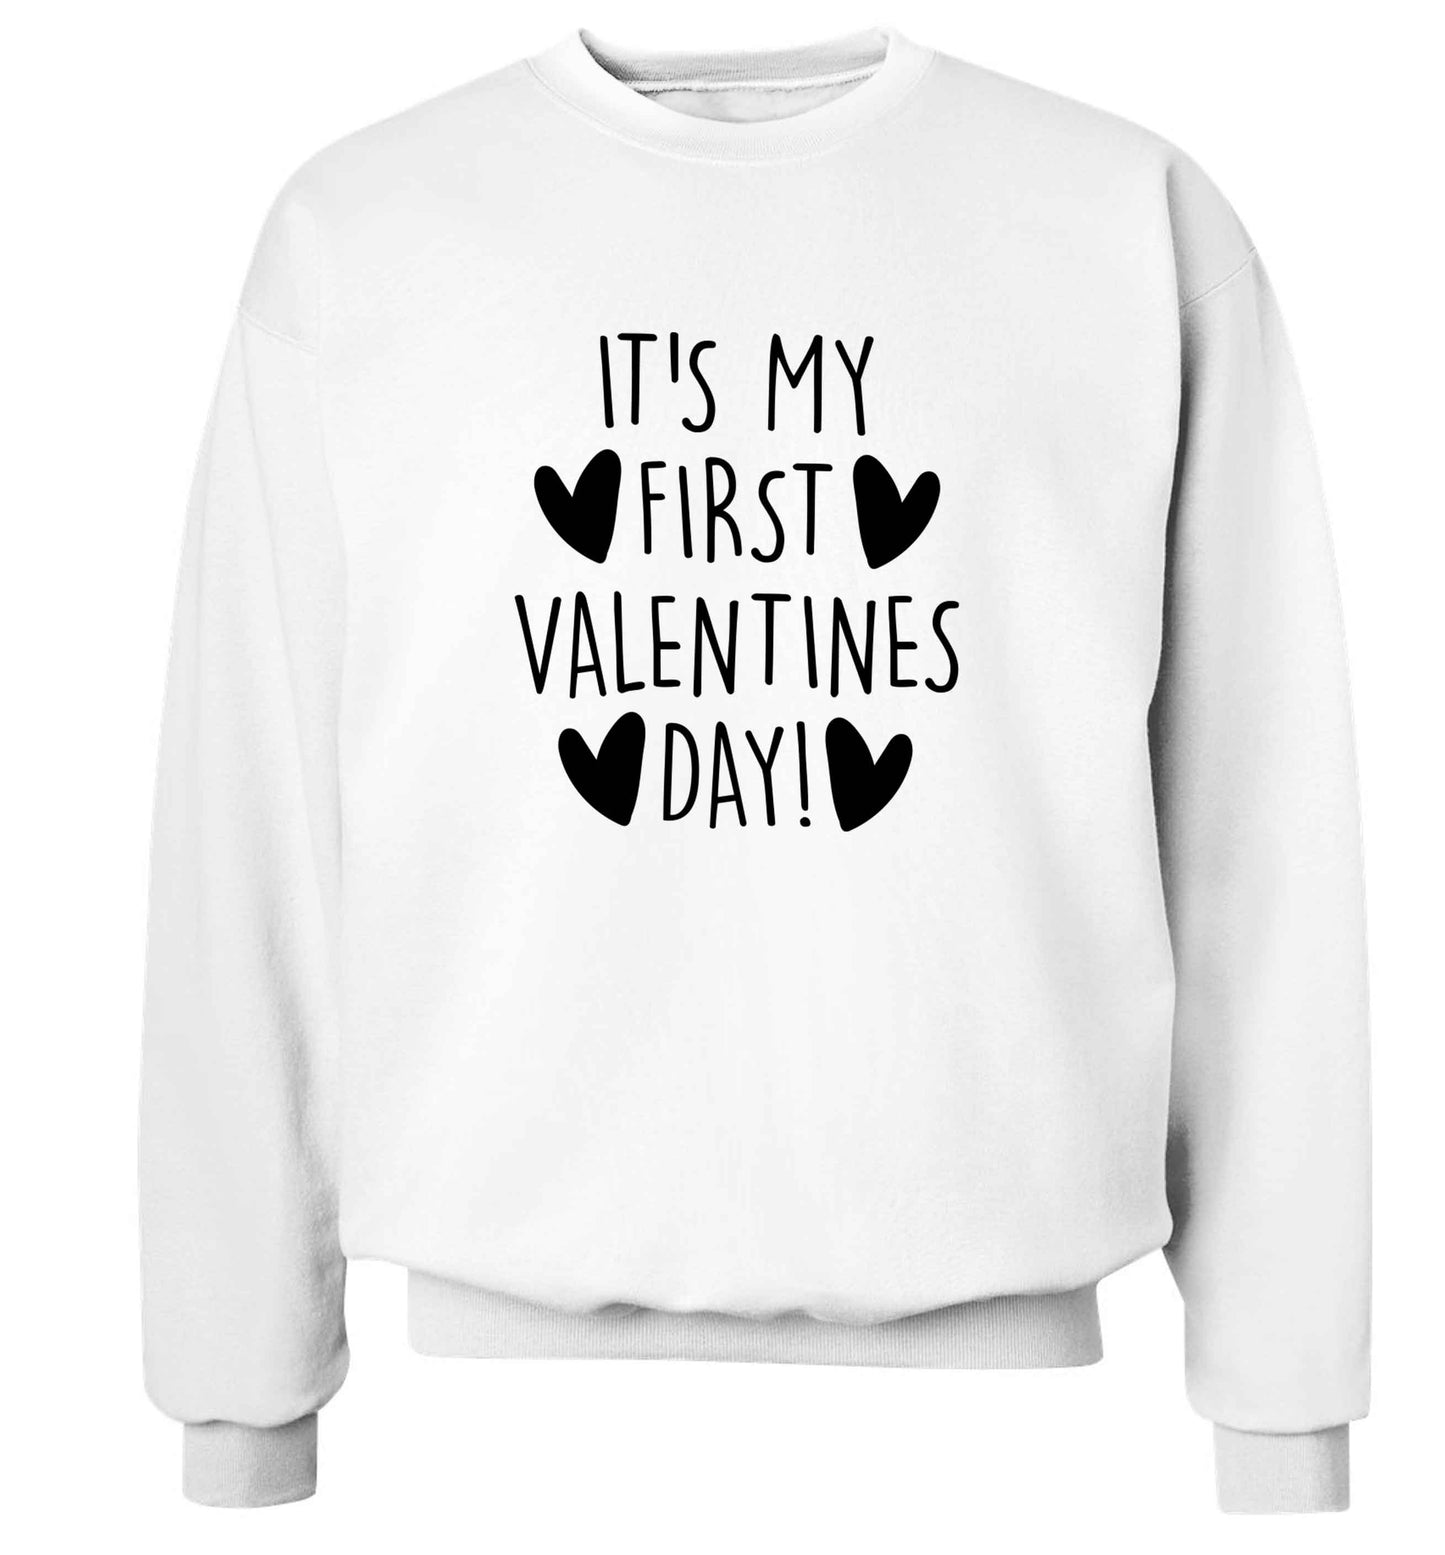 It's my first valentines day! adult's unisex white sweater 2XL